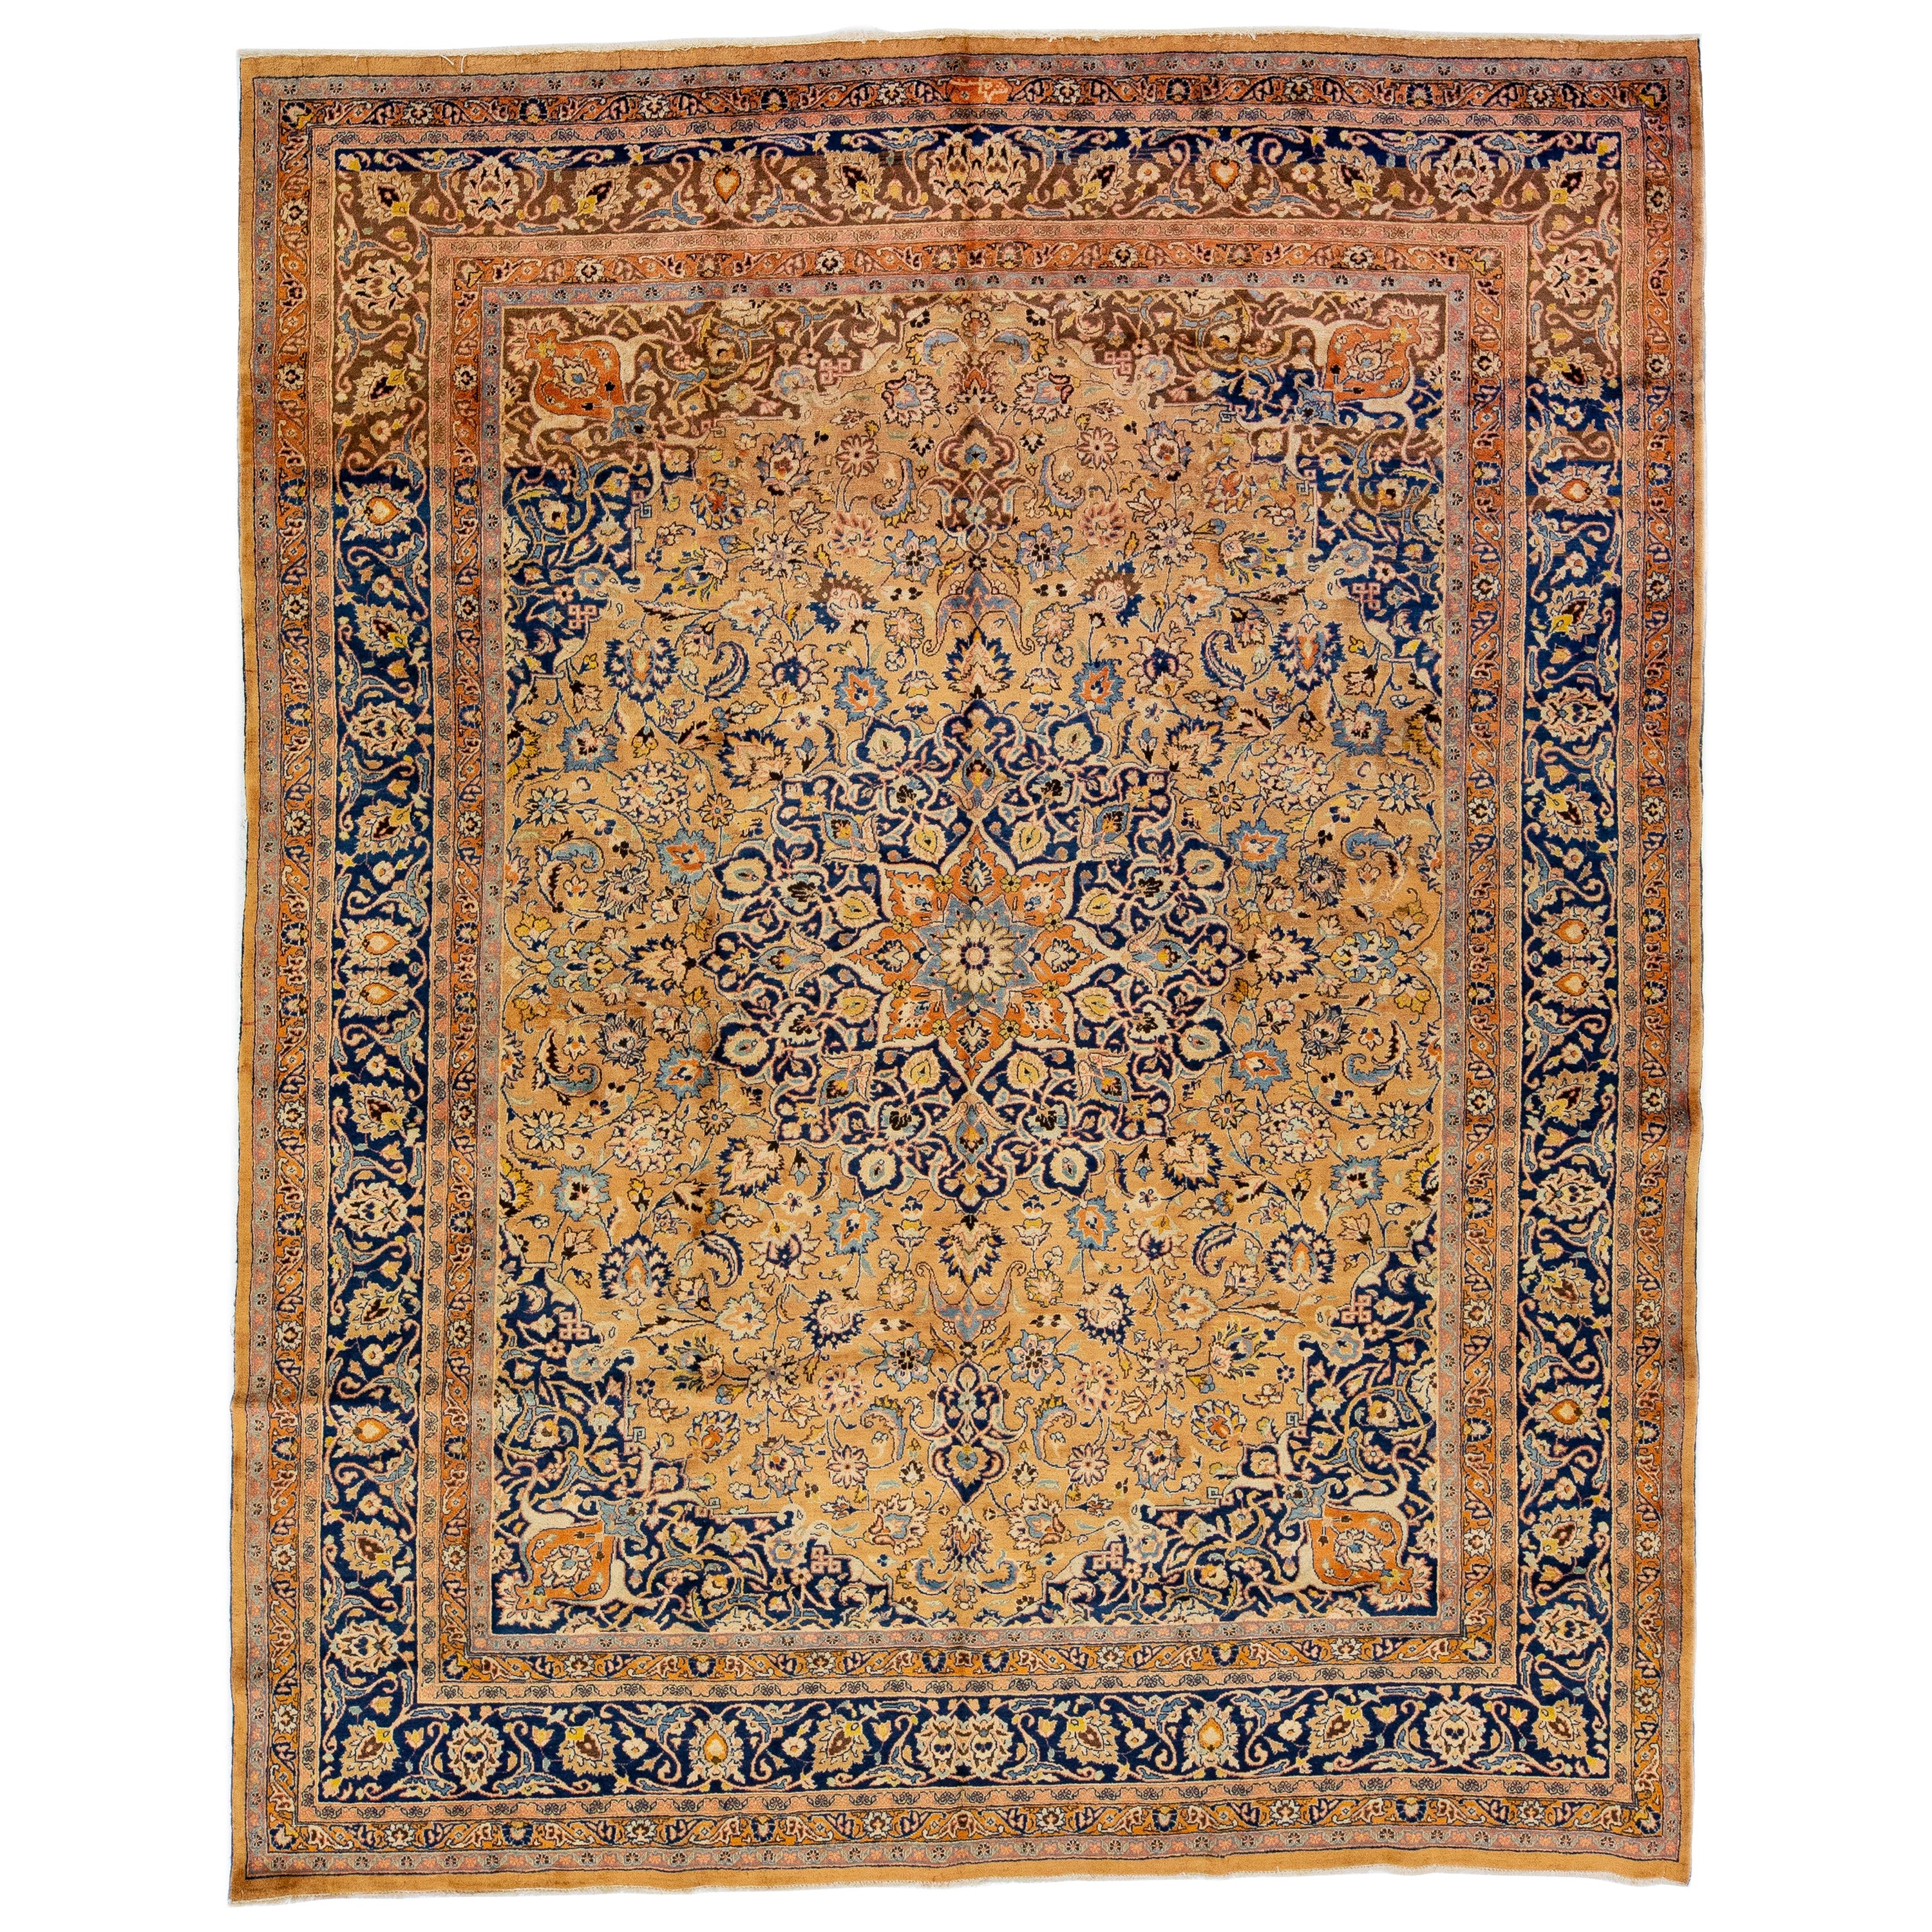 Antique Persian Mashad Handmade Wool Rug with Rosette Motif in Brown Color For Sale